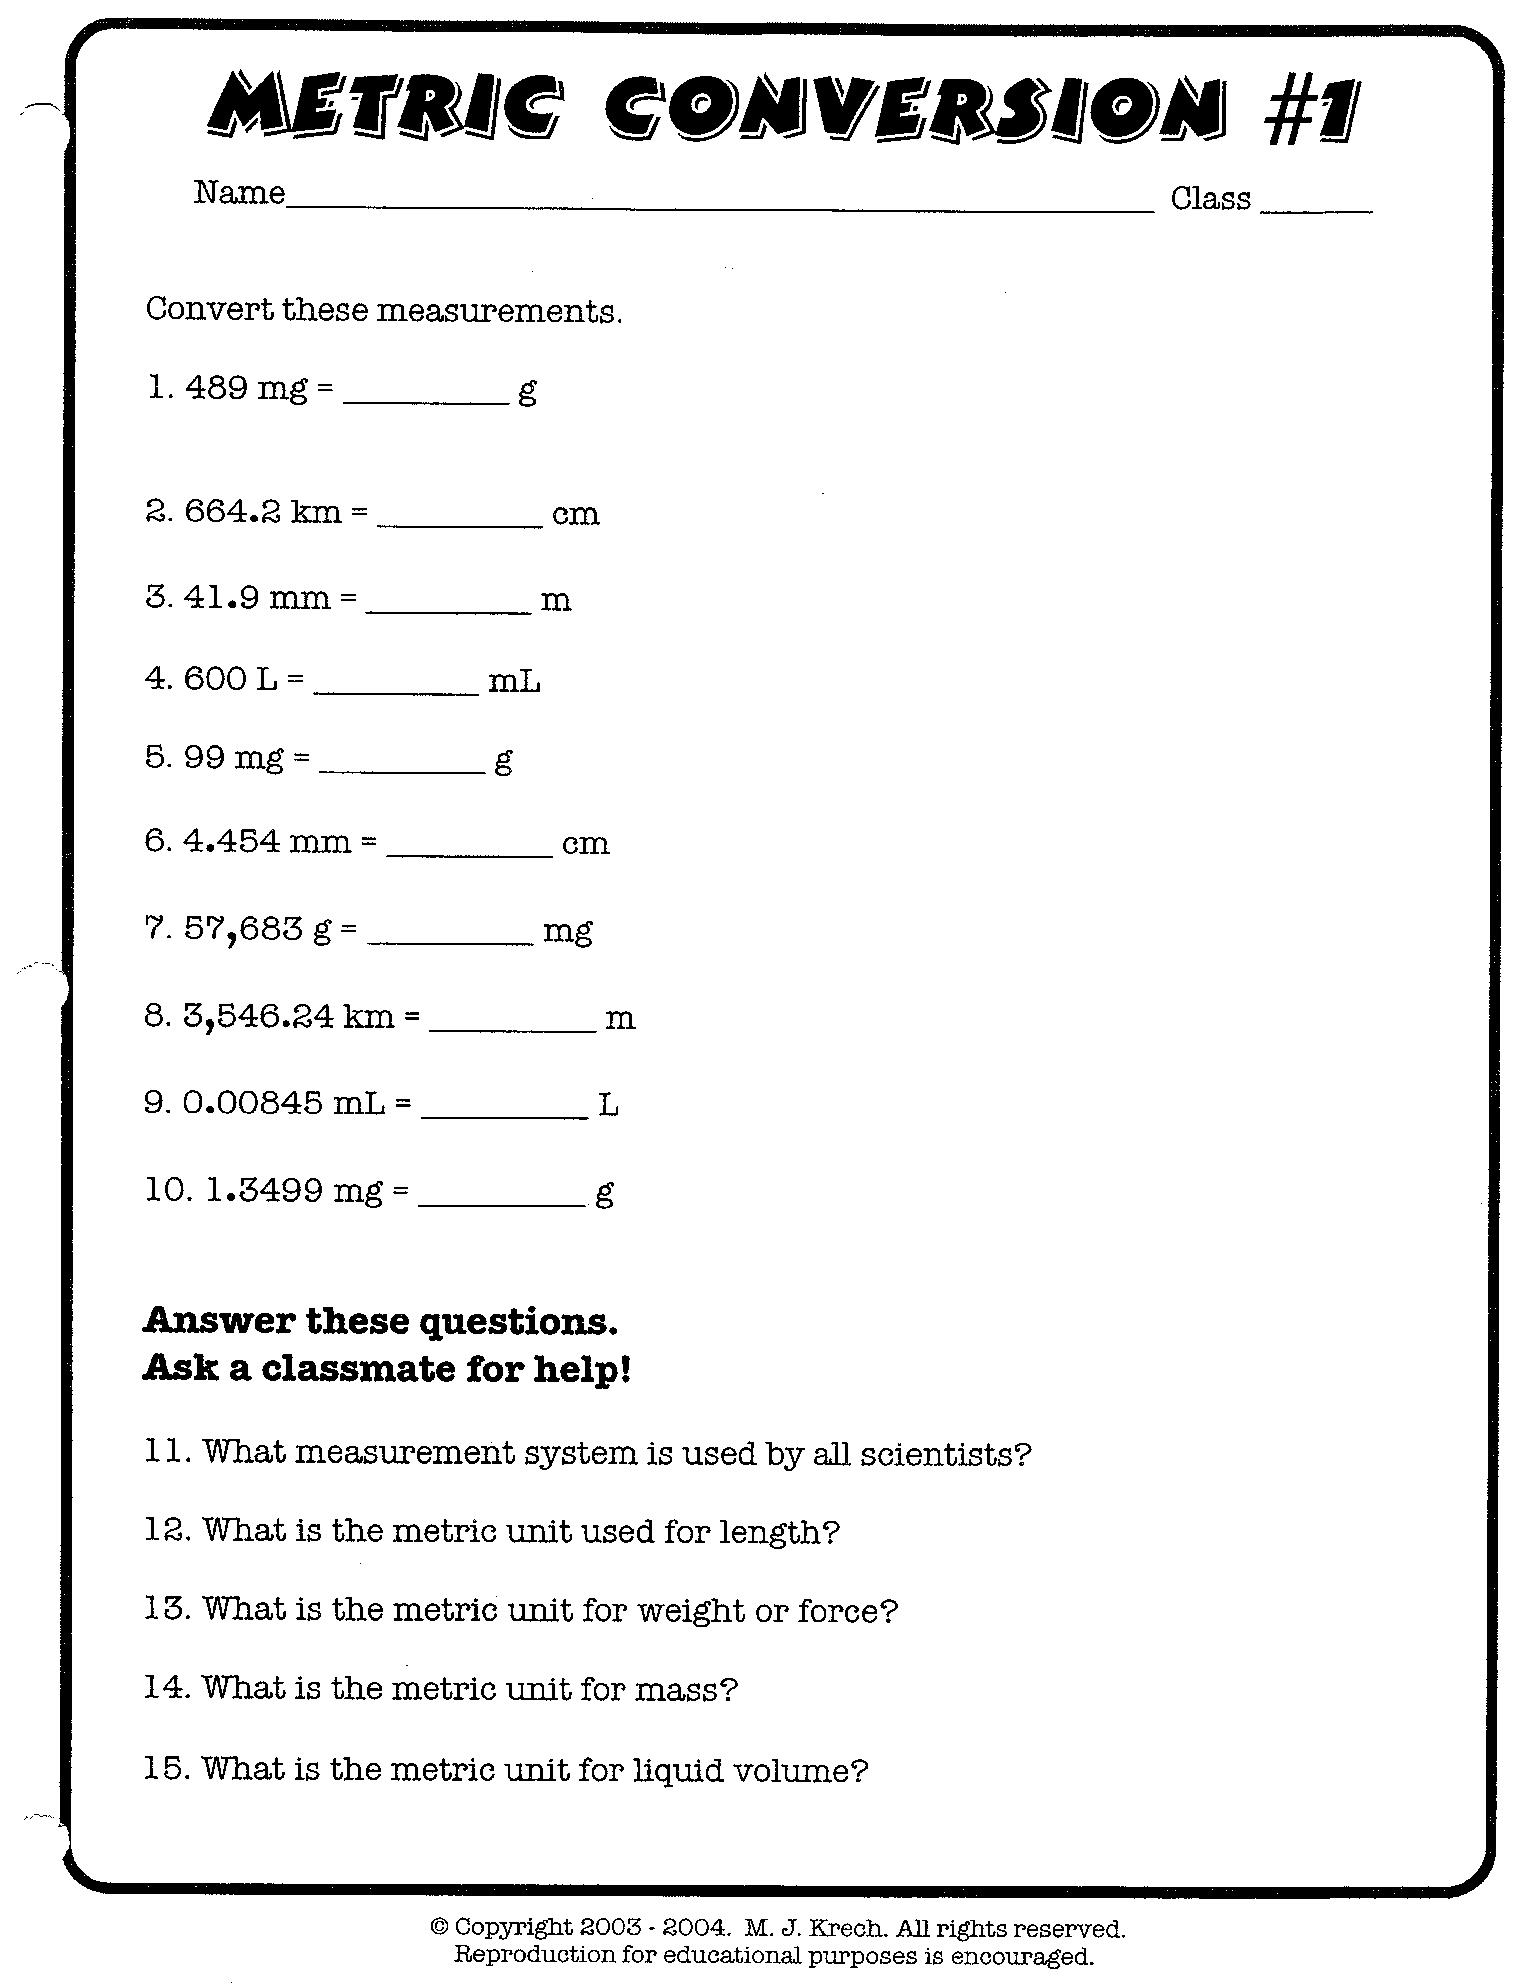 english-to-metric-conversions-download-table